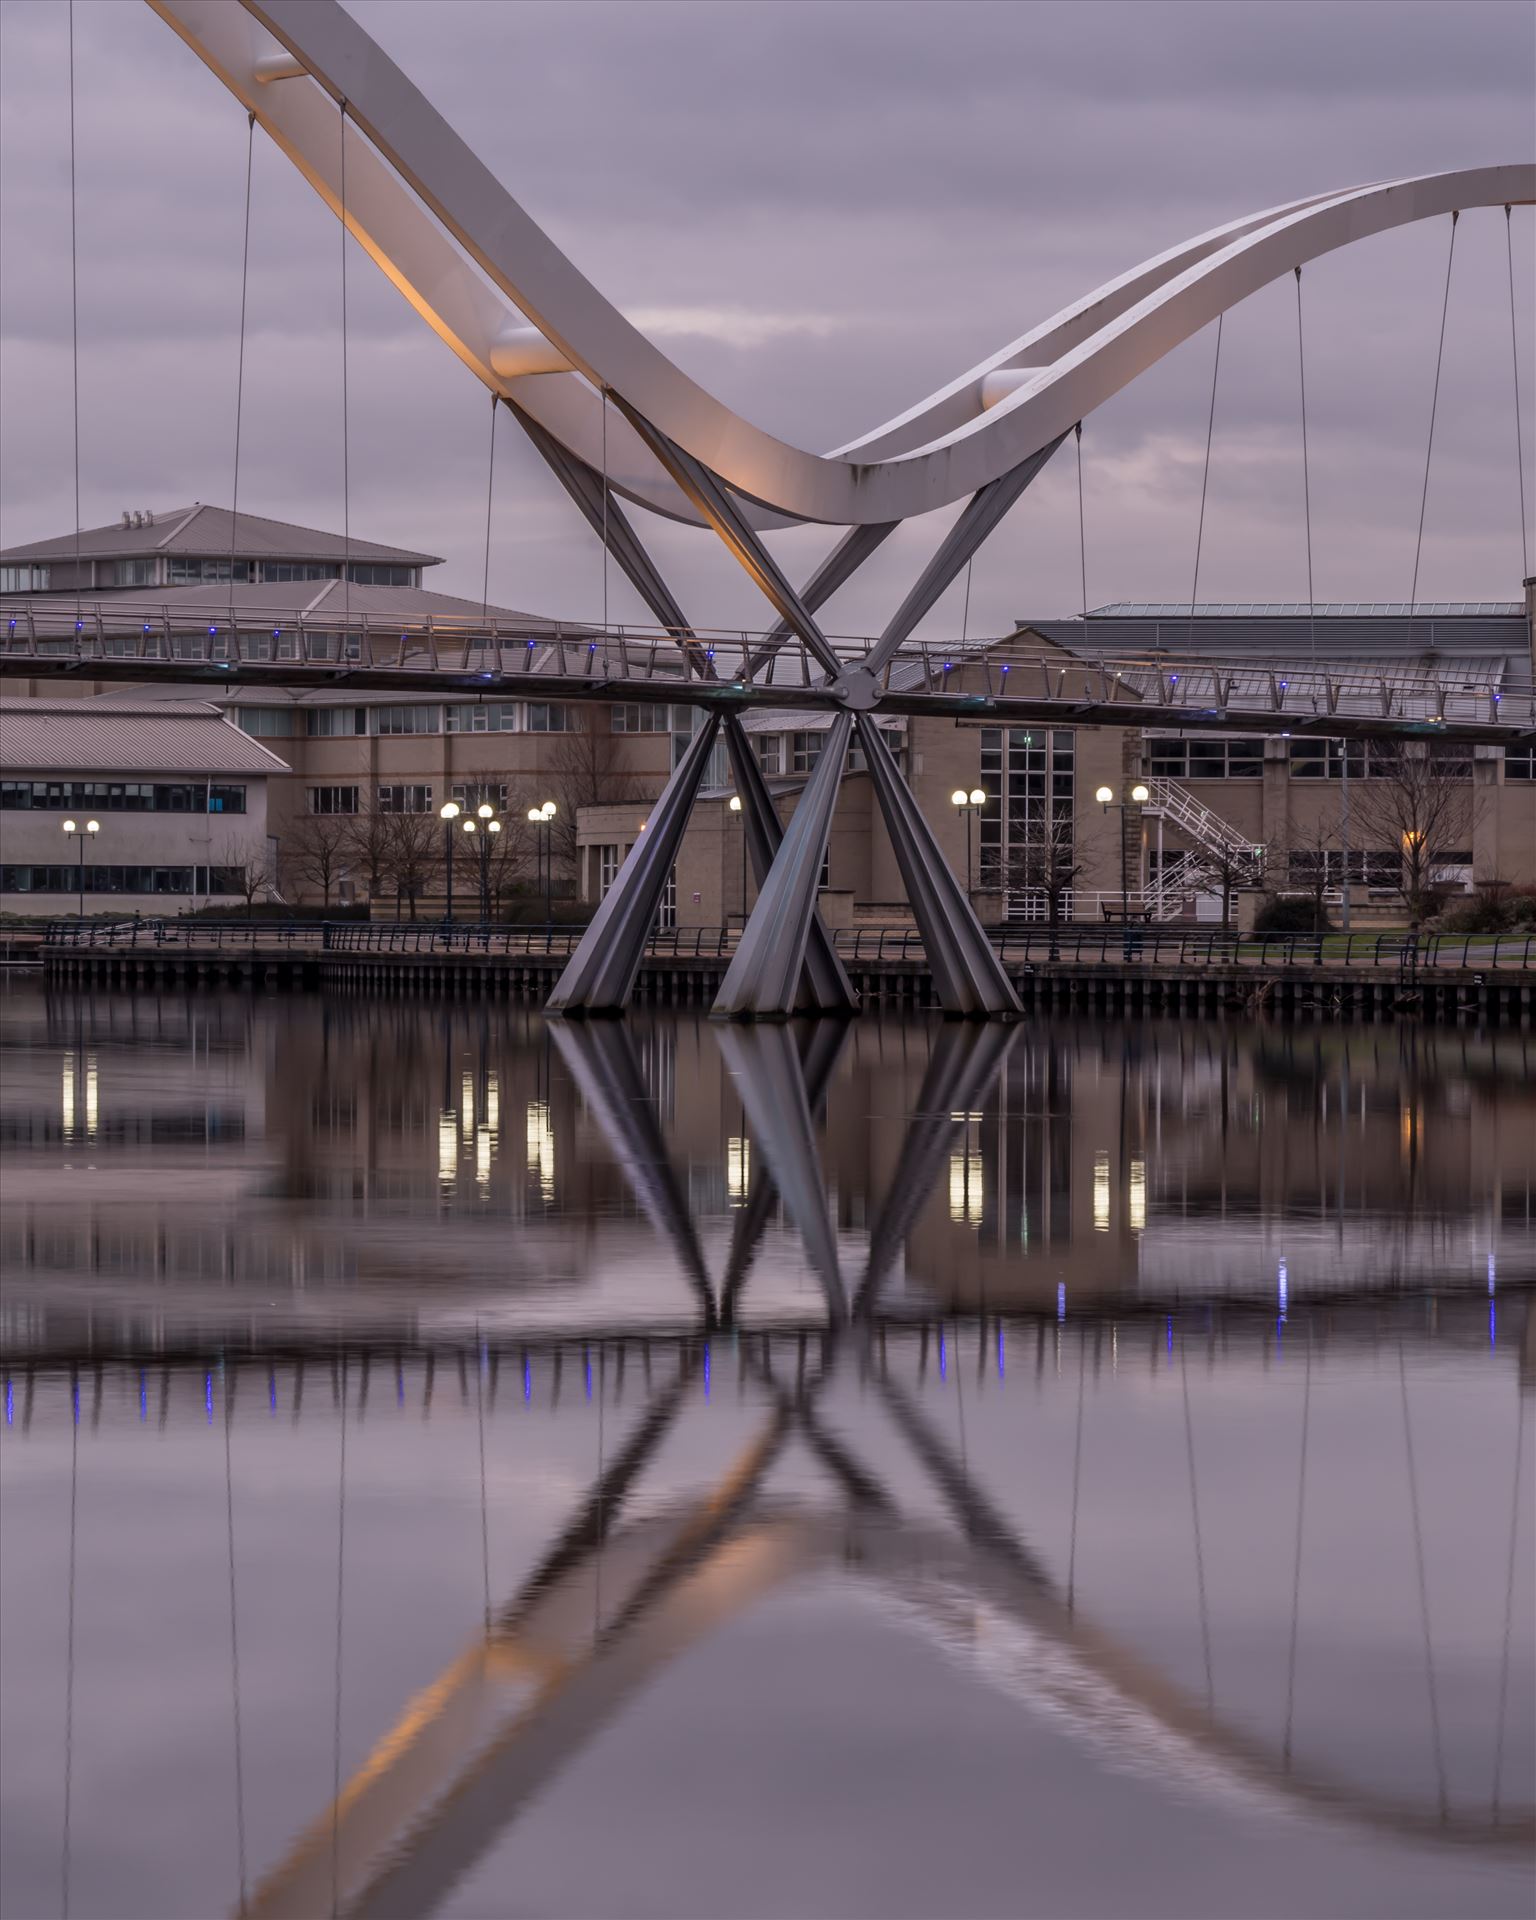 The Infinity Bridge 01 - The Infinity Bridge is a public pedestrian and cycle footbridge across the River Tees that was officially opened on 14 May 2009 at a cost of £15 million. by philreay